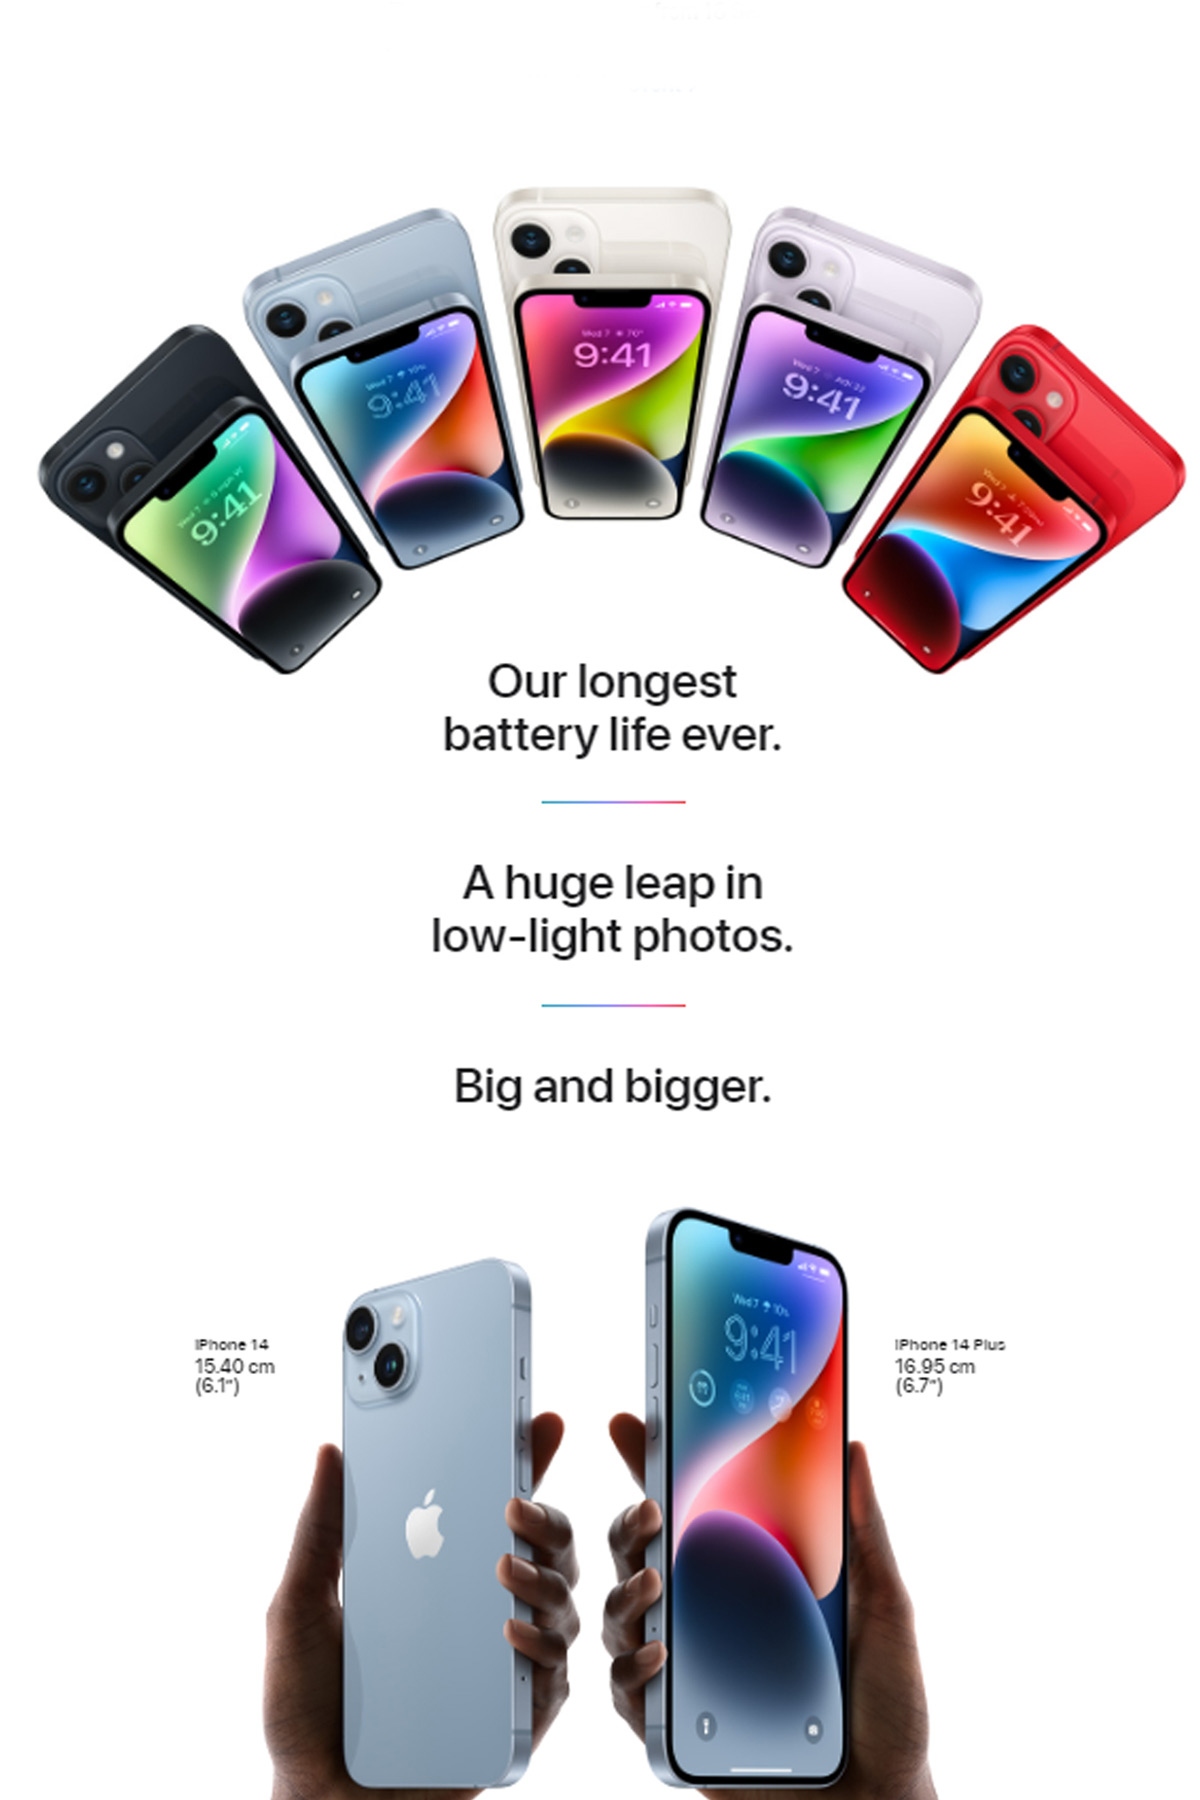 Apple Event 2022 Highlights - IPhone 14 with a new bionic Chip, new AirPods powered by H2 Chip and also unveils many features for Apple Watches